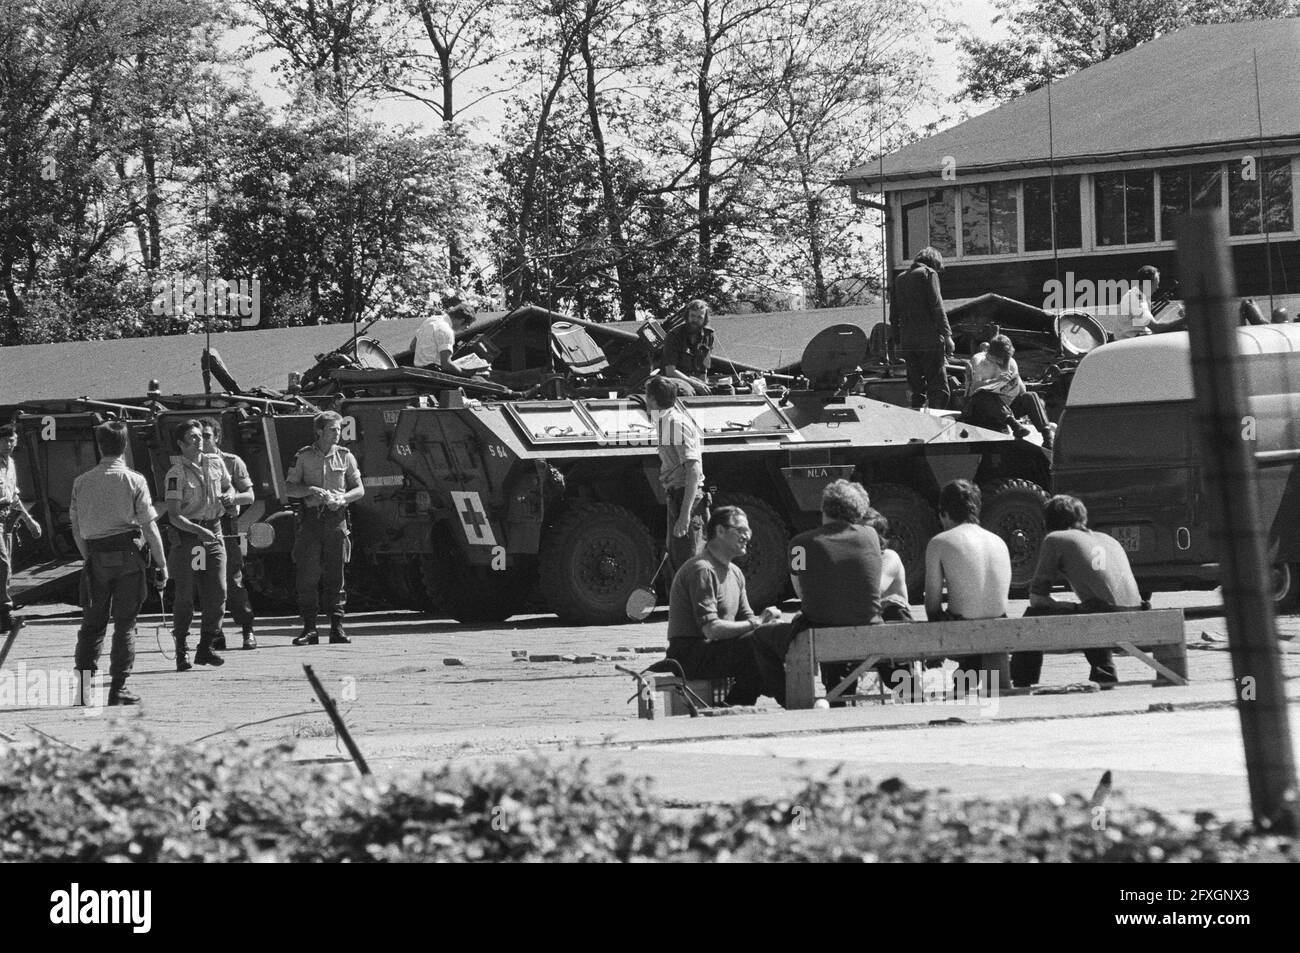 Fifth, sixth, seventh day hostage taking school Bovensmilde (Whitsun); soldiers around school play badminton, 28 May 1977, badminton, hostages, military, armored vehicles, schools, sports, The Netherlands, 20th century press agency photo, news to remember, documentary, historic photography 1945-1990, visual stories, human history of the Twentieth Century, capturing moments in time Stock Photo